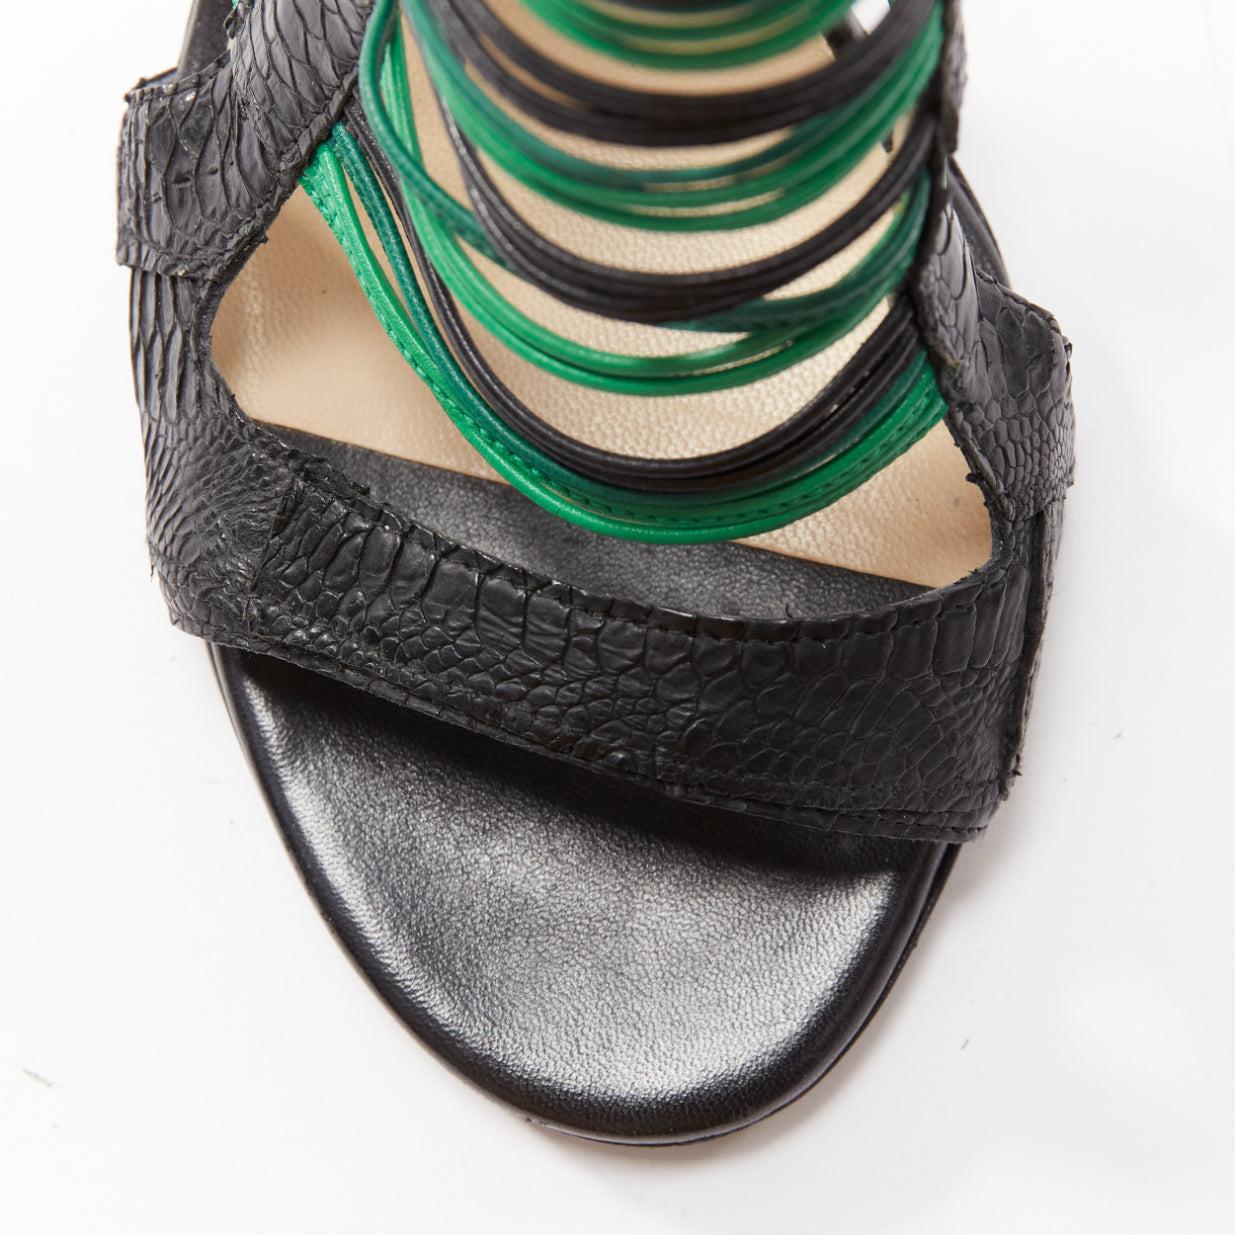 JIMMY CHOO Corsica black green striped wire leather caged heel sandal EU37.5 For Sale 2